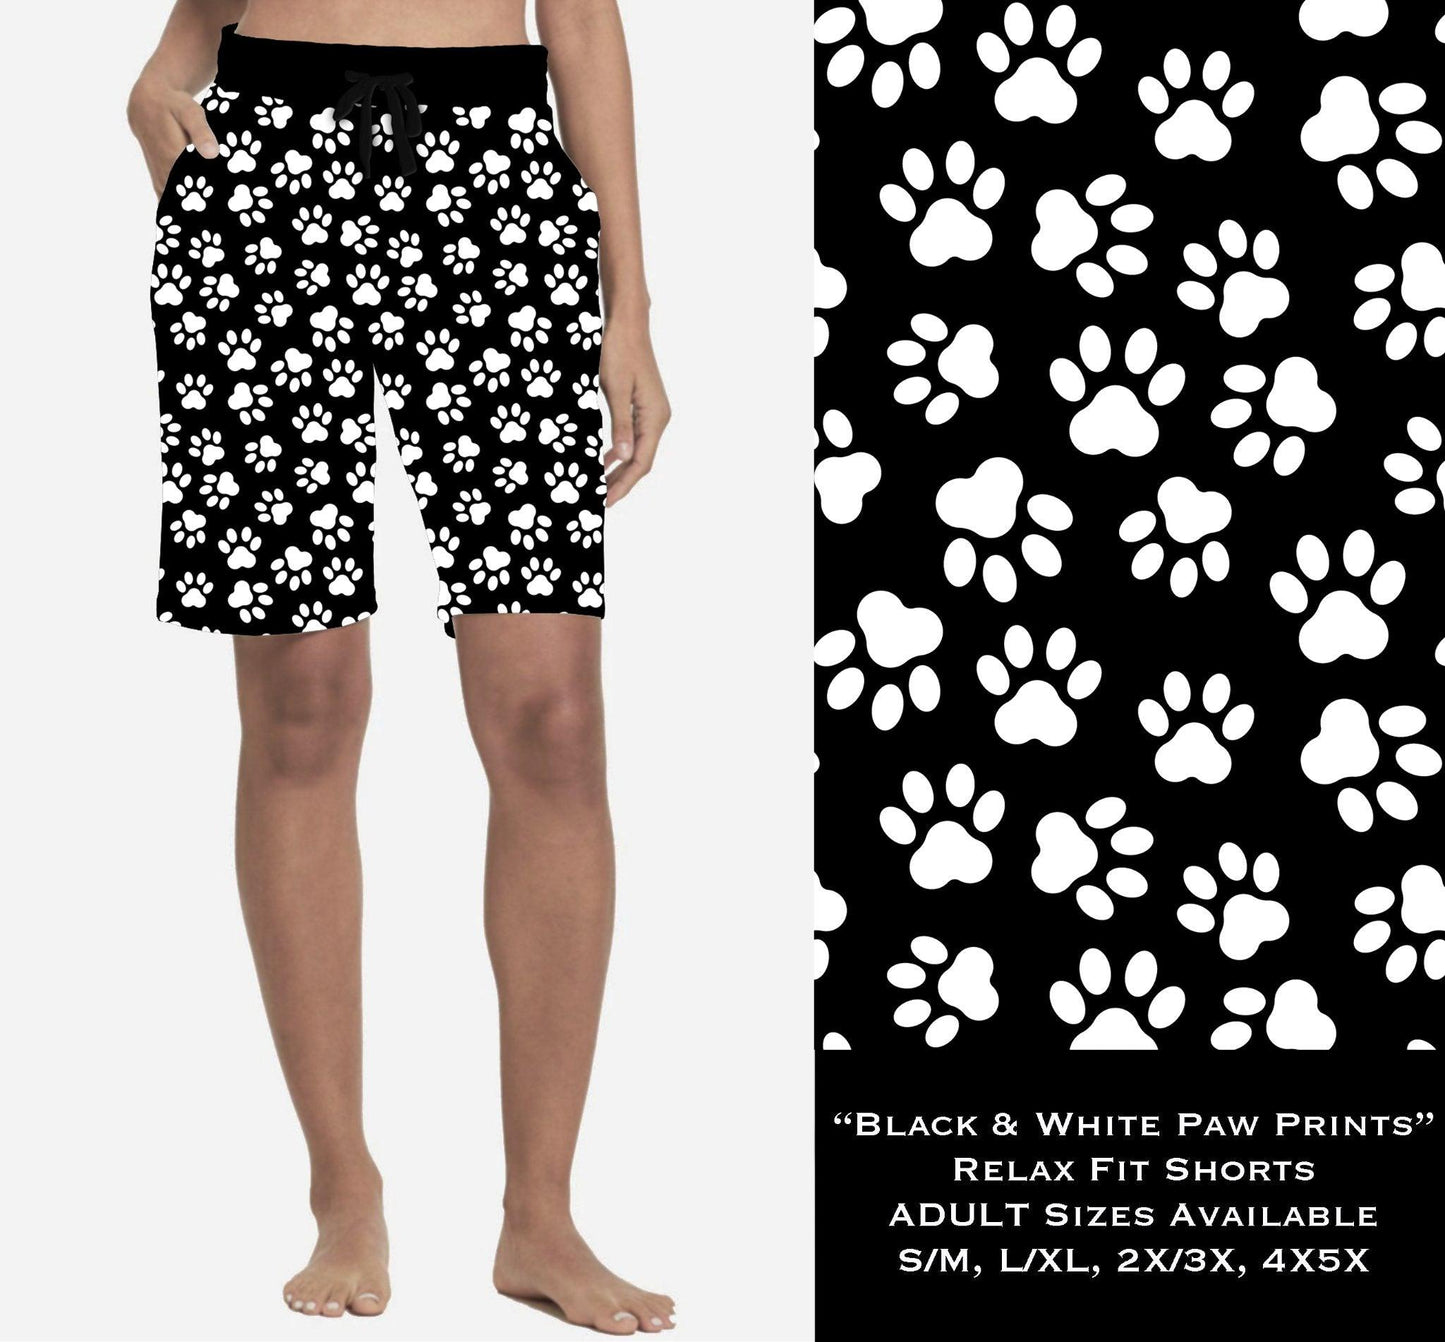 Black & White Paw Prints Relaxed Fit Shorts